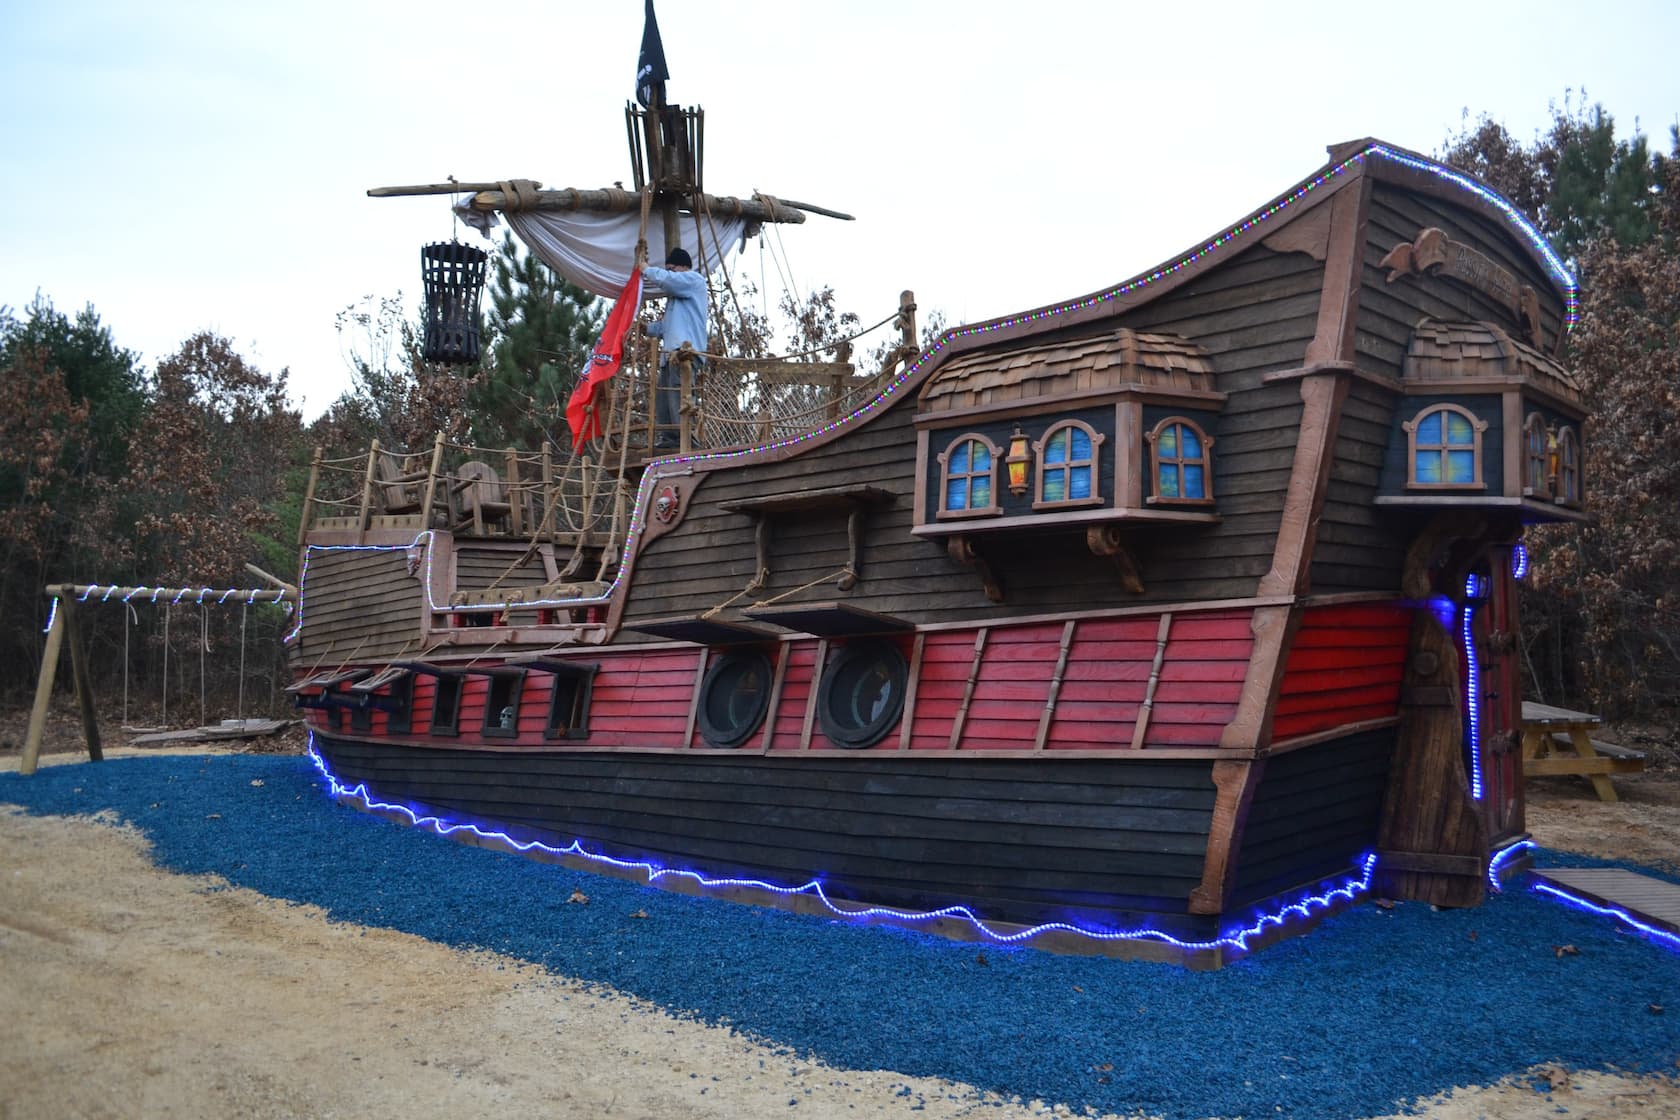 The exterior of a novelty pirate ship cabin that can be rented in the Wisconsin Dells.